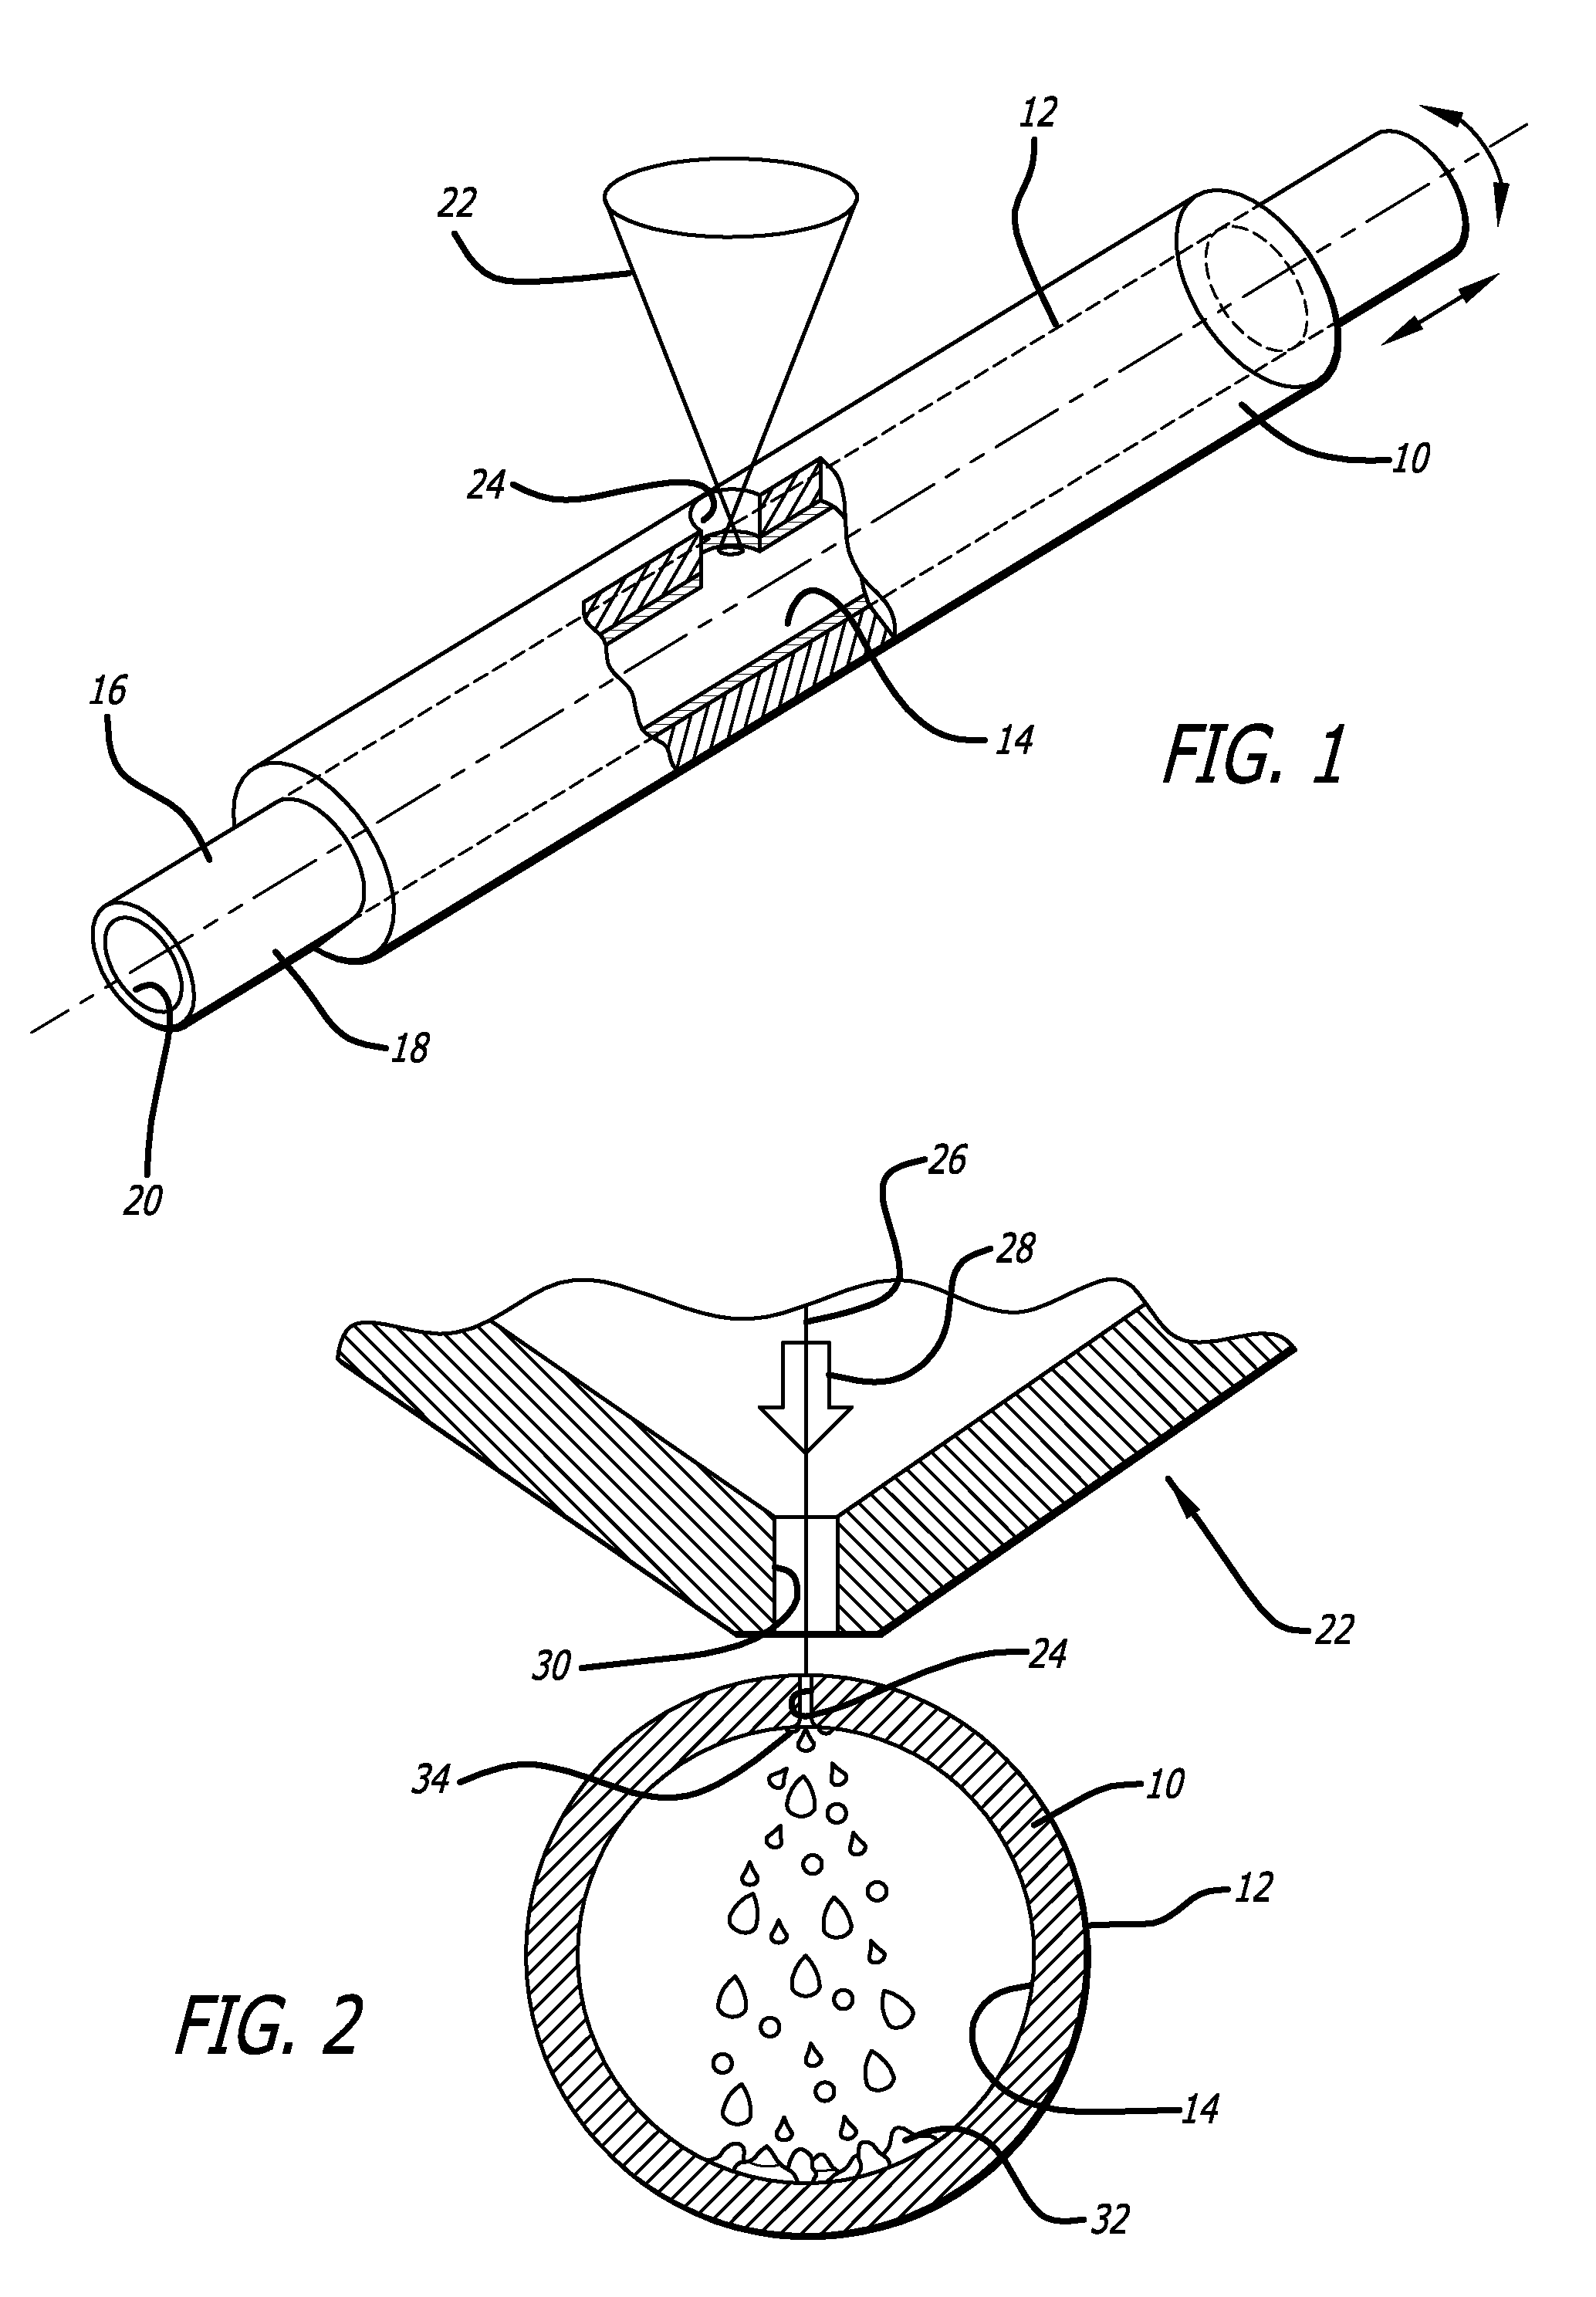 Methods for laser cutting and processing tubing to make medical devices